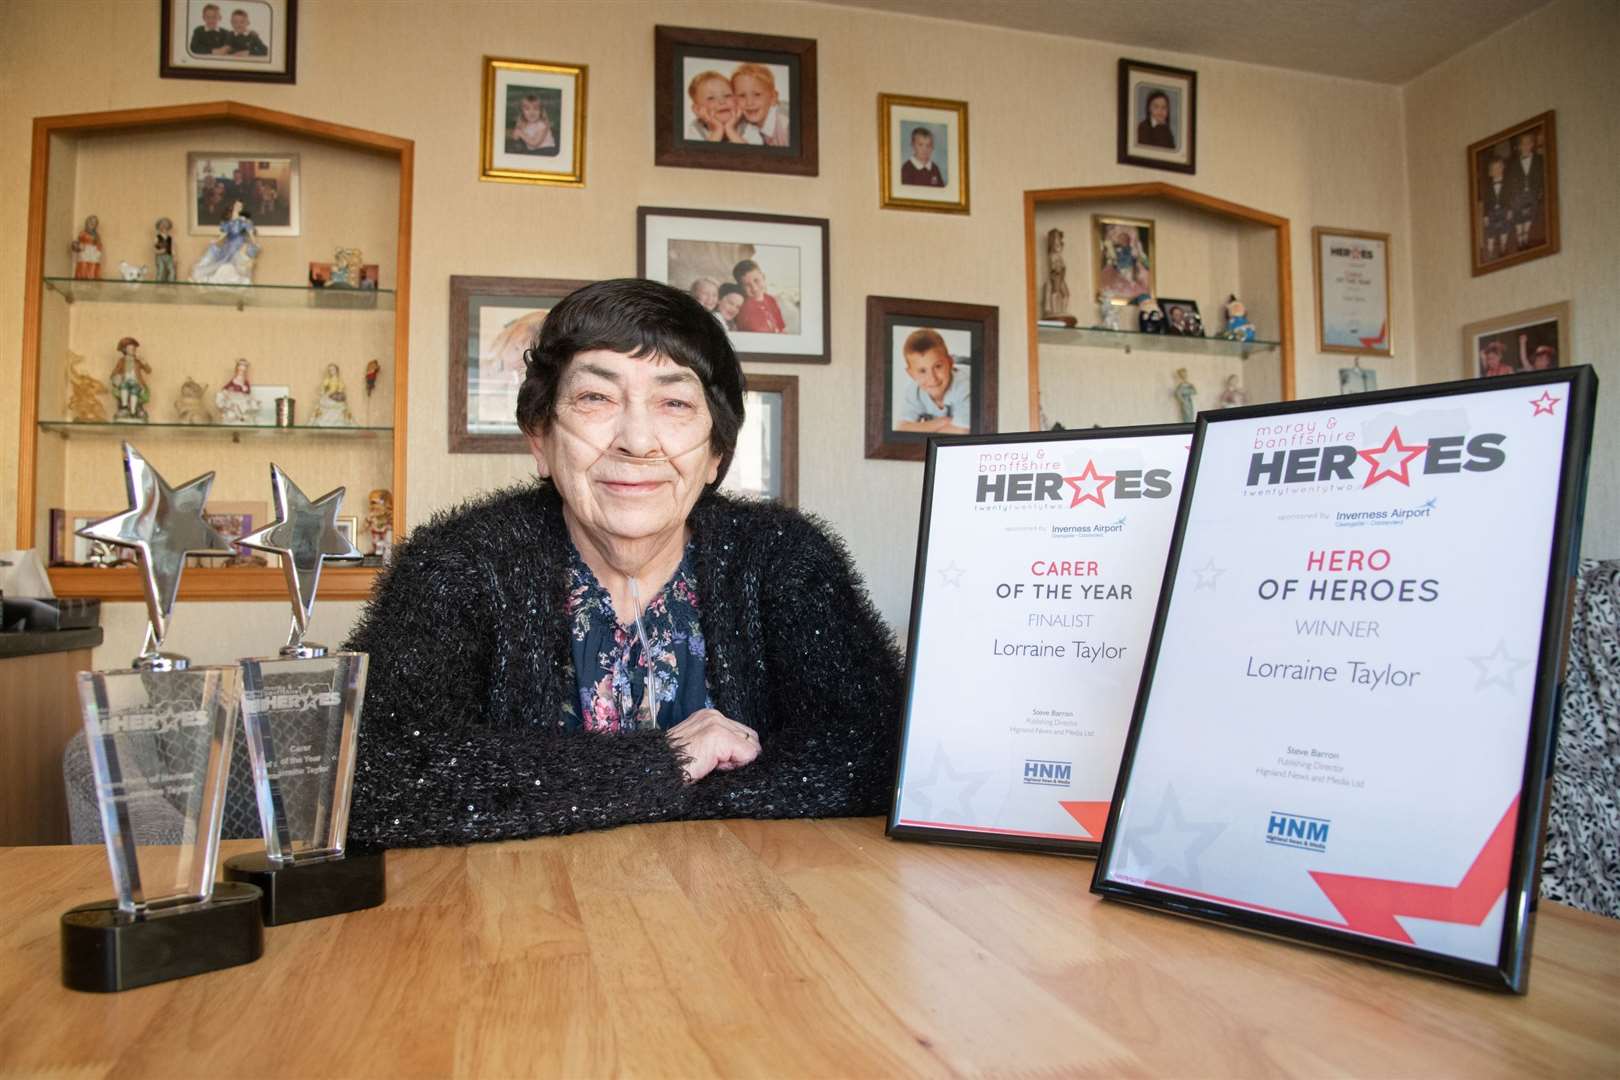 Lorraine Taylor, Banff was named 2022 hero of heroes and carer of the year. Picture: Daniel Forsyth